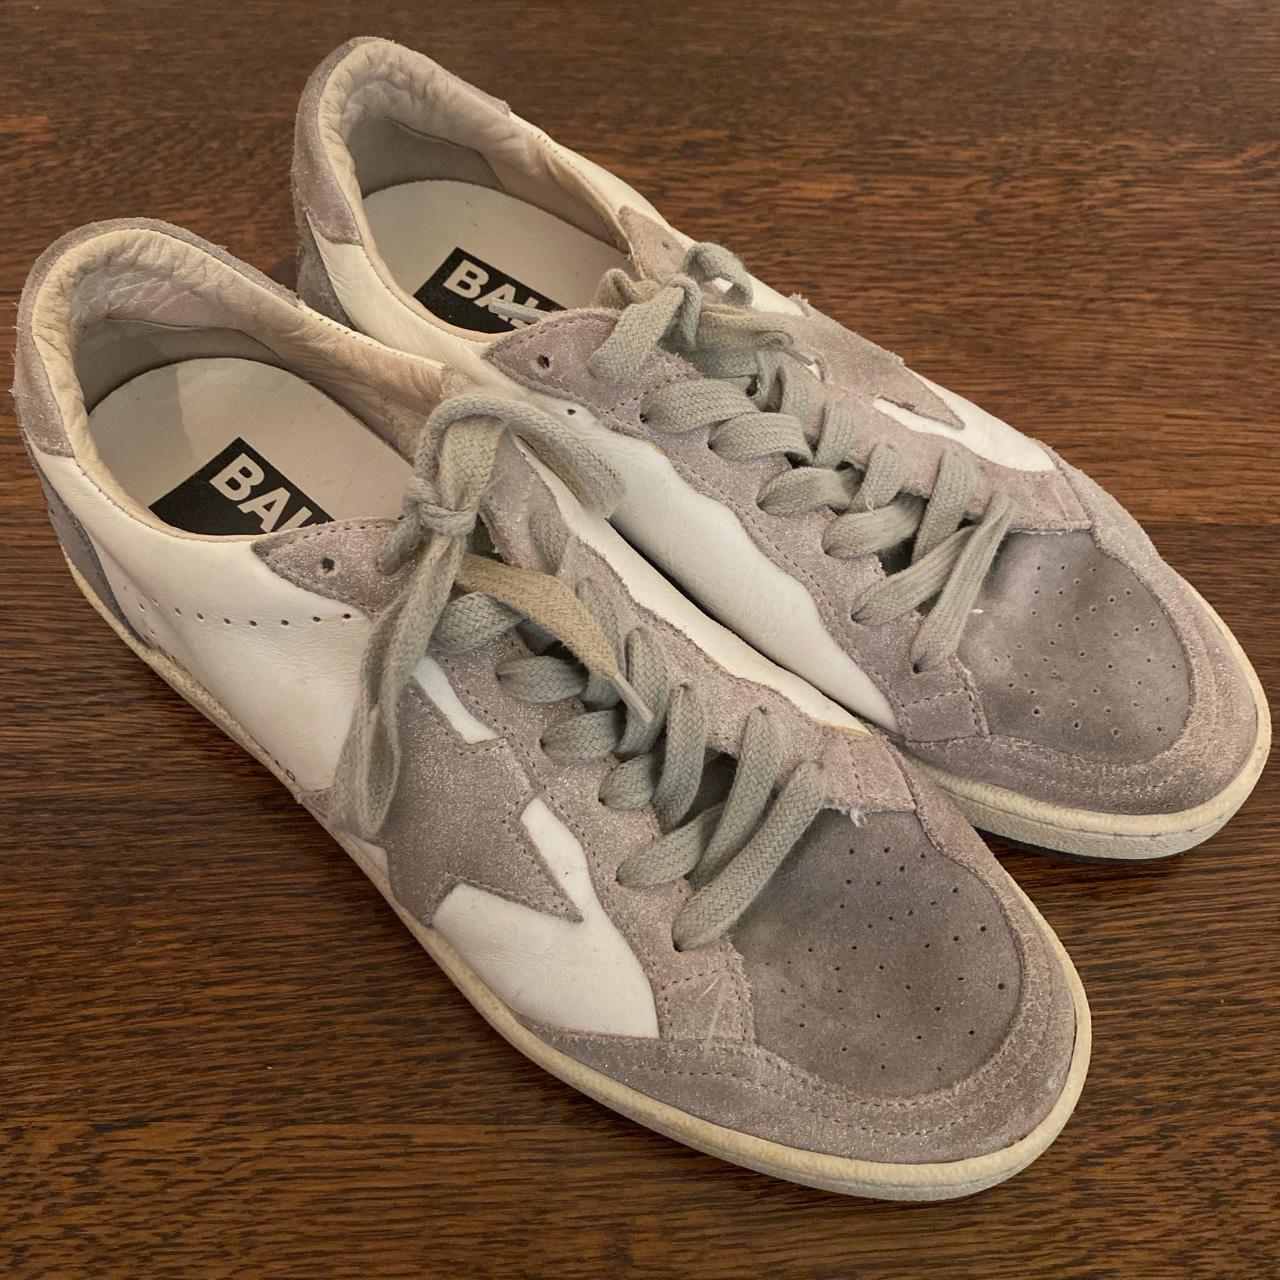 Golden Goose Women's White and Grey Trainers